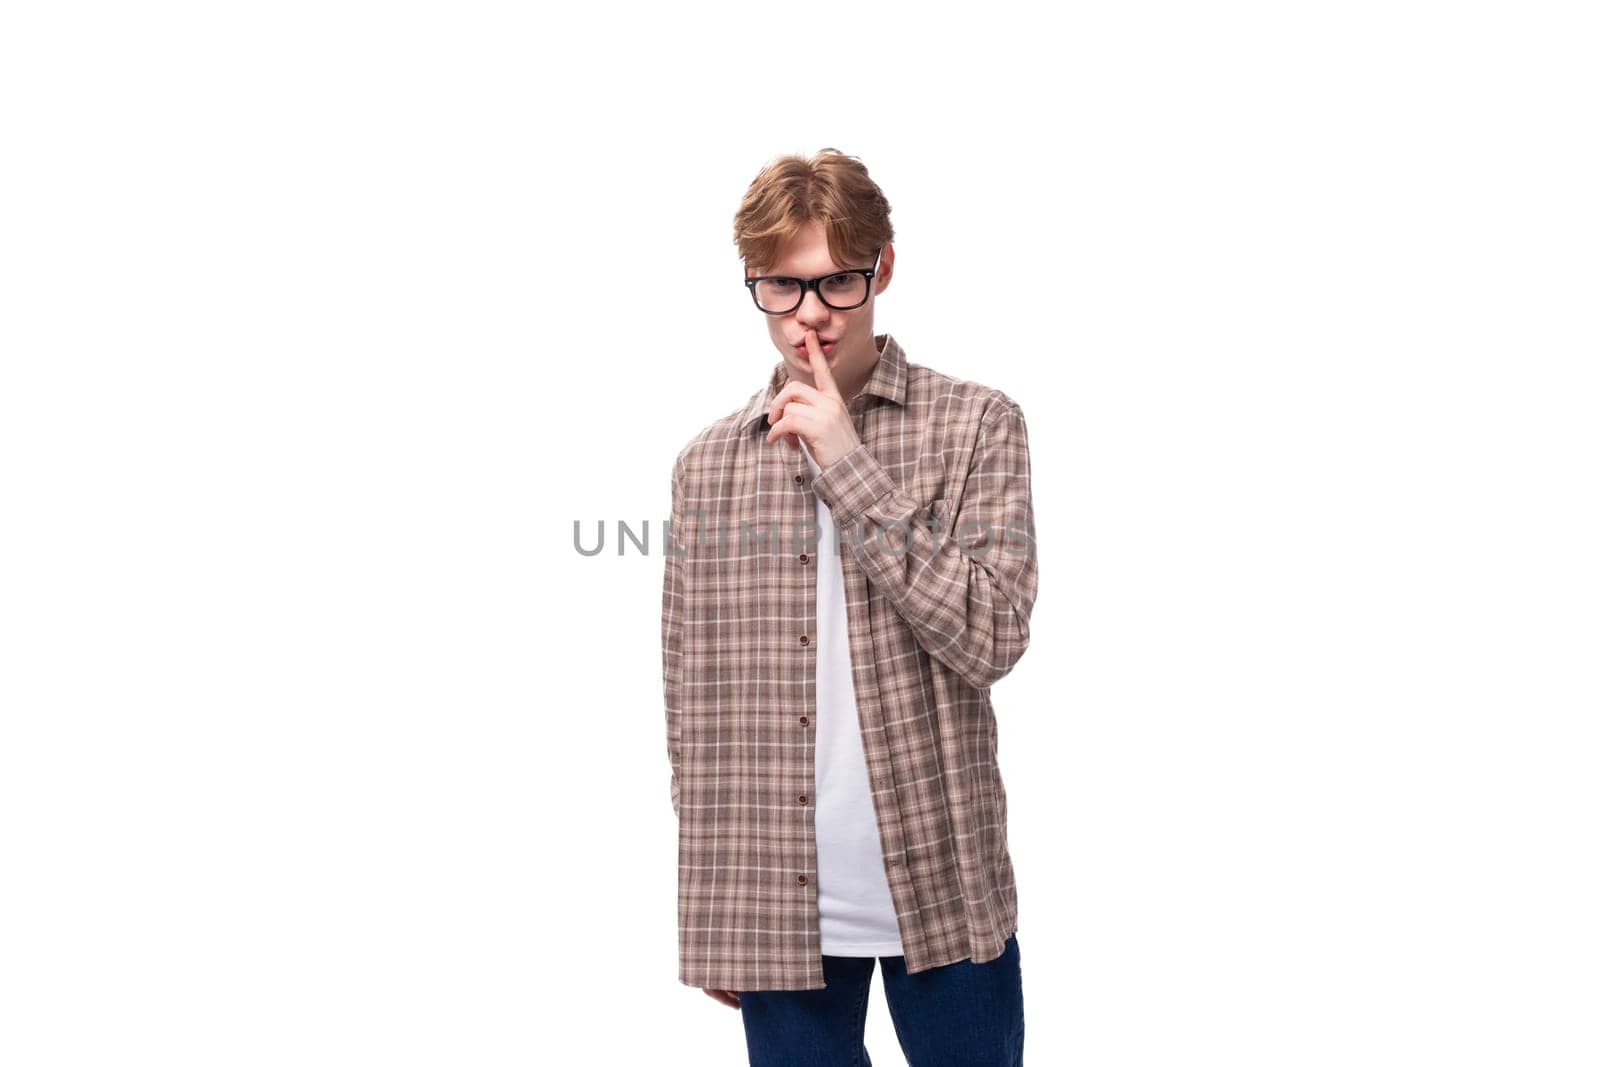 a young European man with red hair in glasses and a plaid shirt thought. people lifestyle concept.